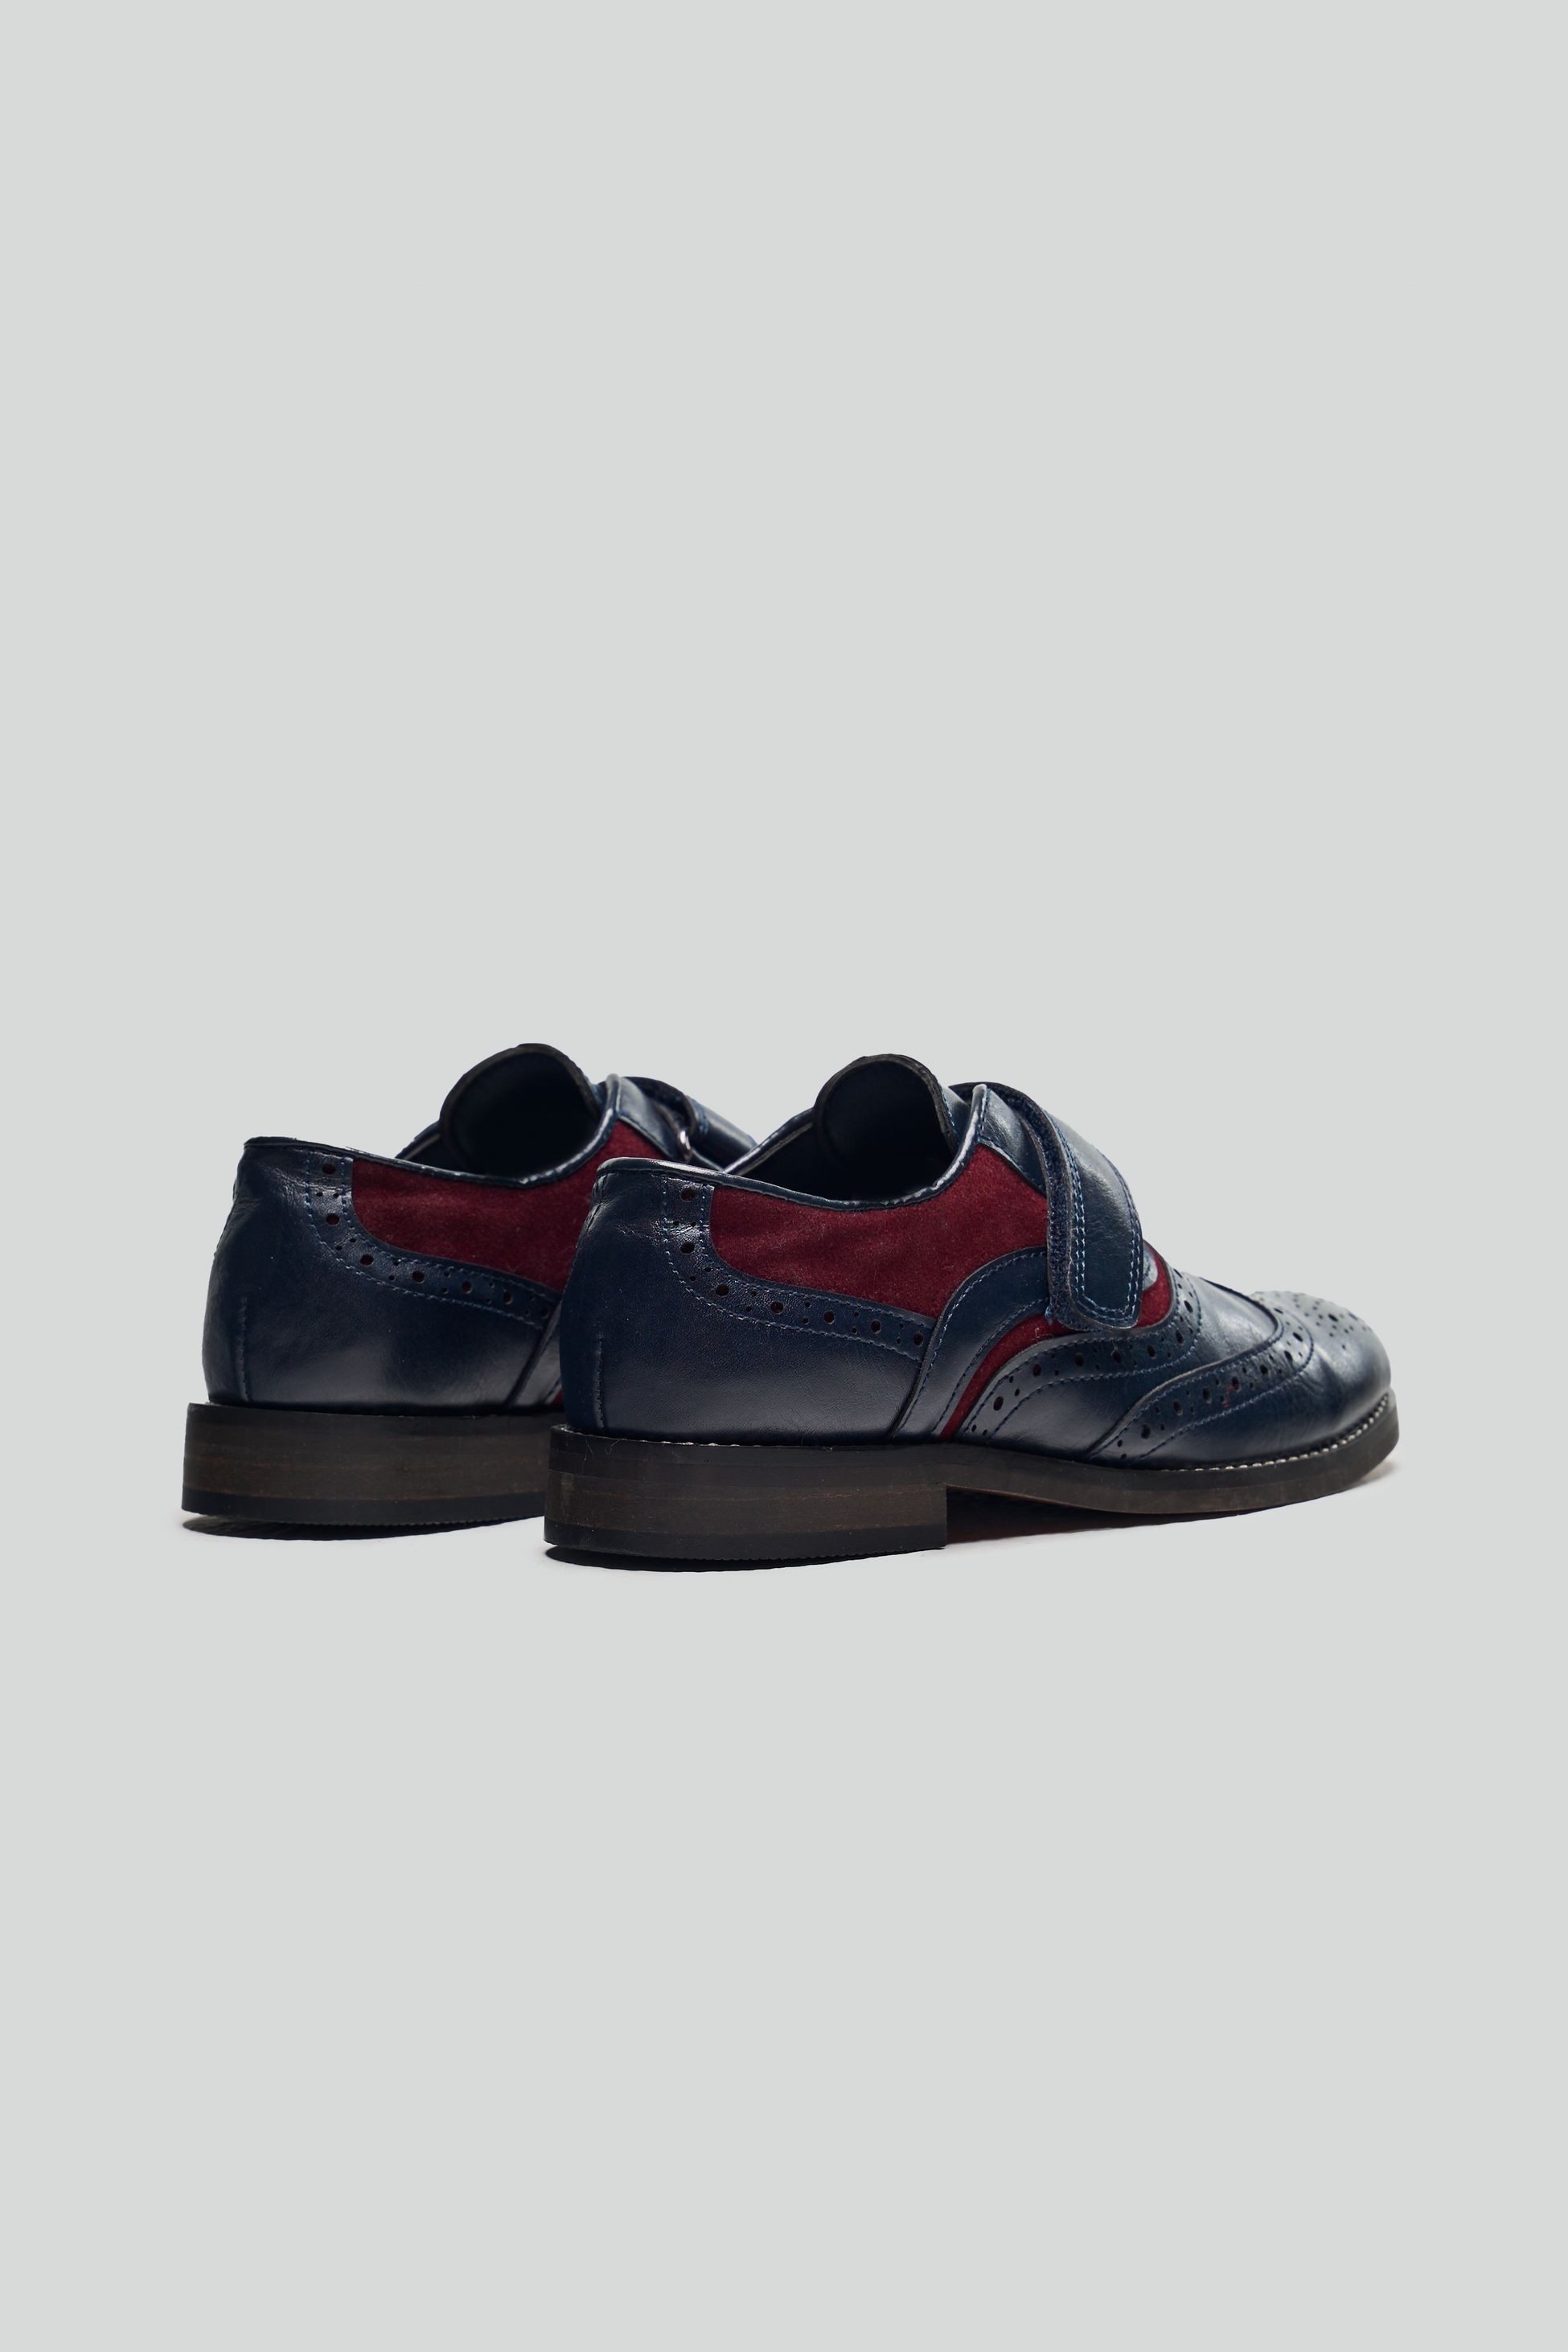 Boys Lace-up Oxford Brogue Dress shoes - RUSSEL - Marineblau - rot